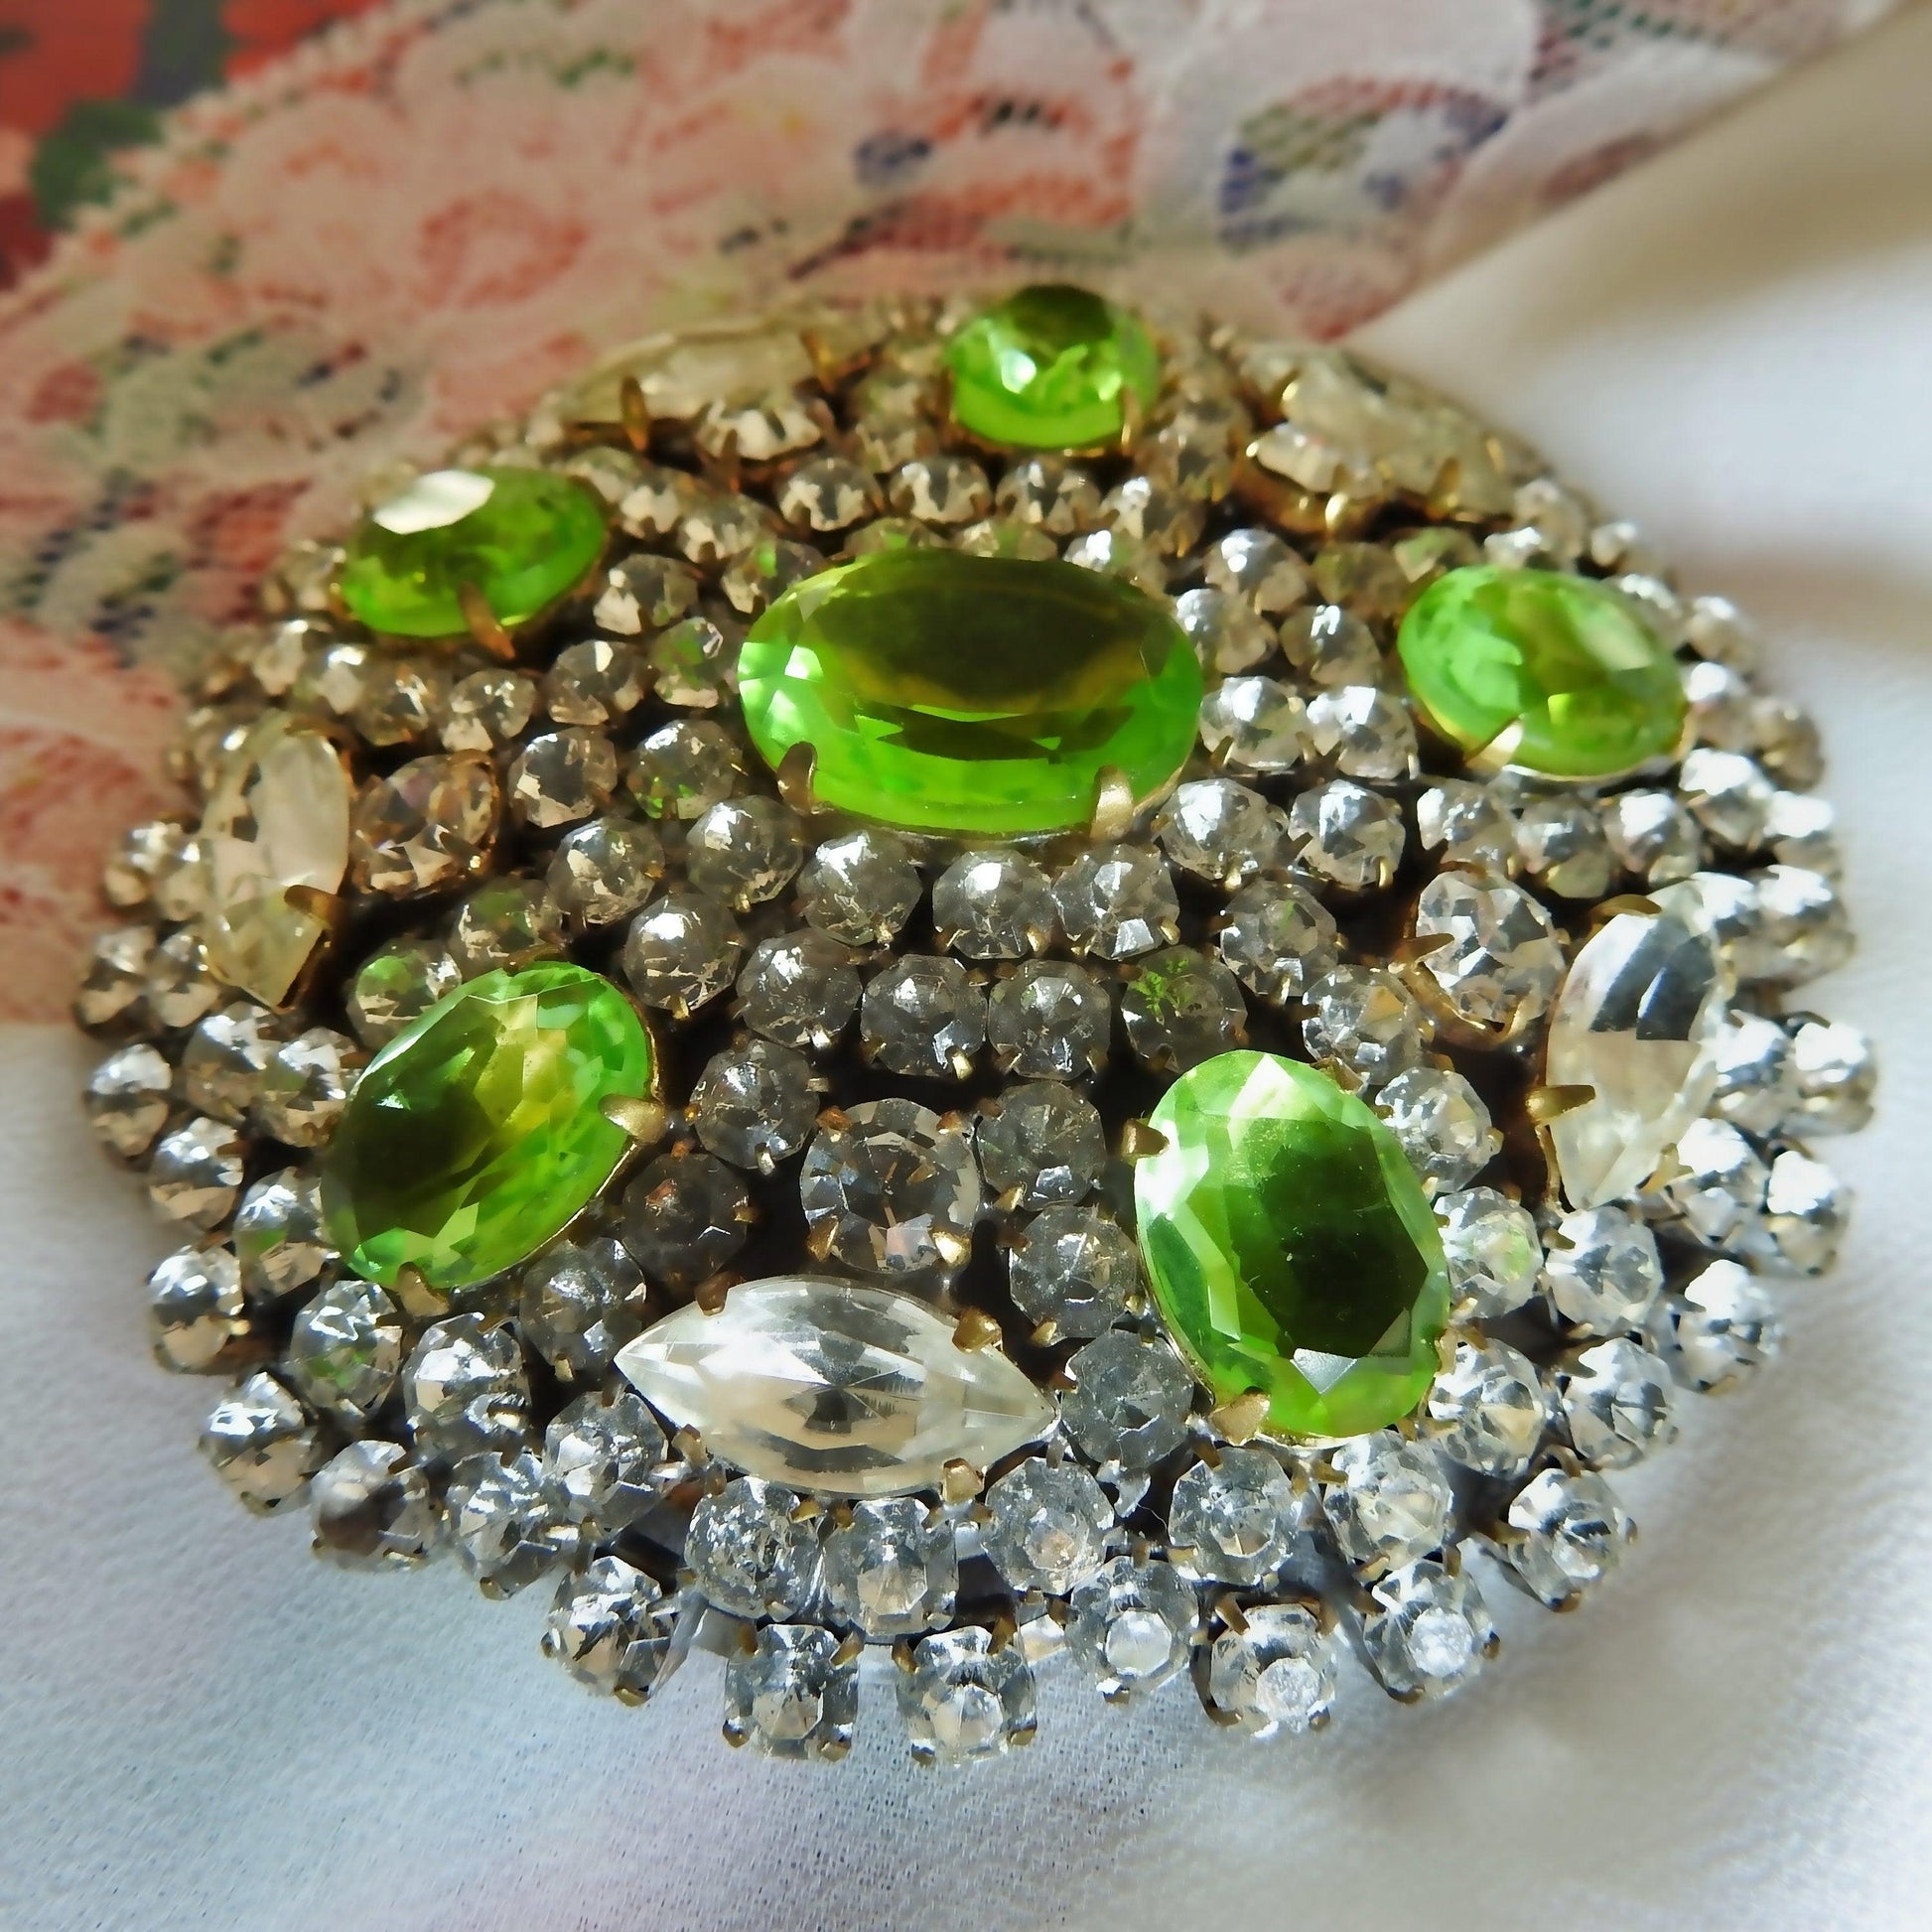 Elegant Austrian crystal brooch pin, retro green brooch, jewelry gift for her from husband, unique broach costume jewelry, gift for wife